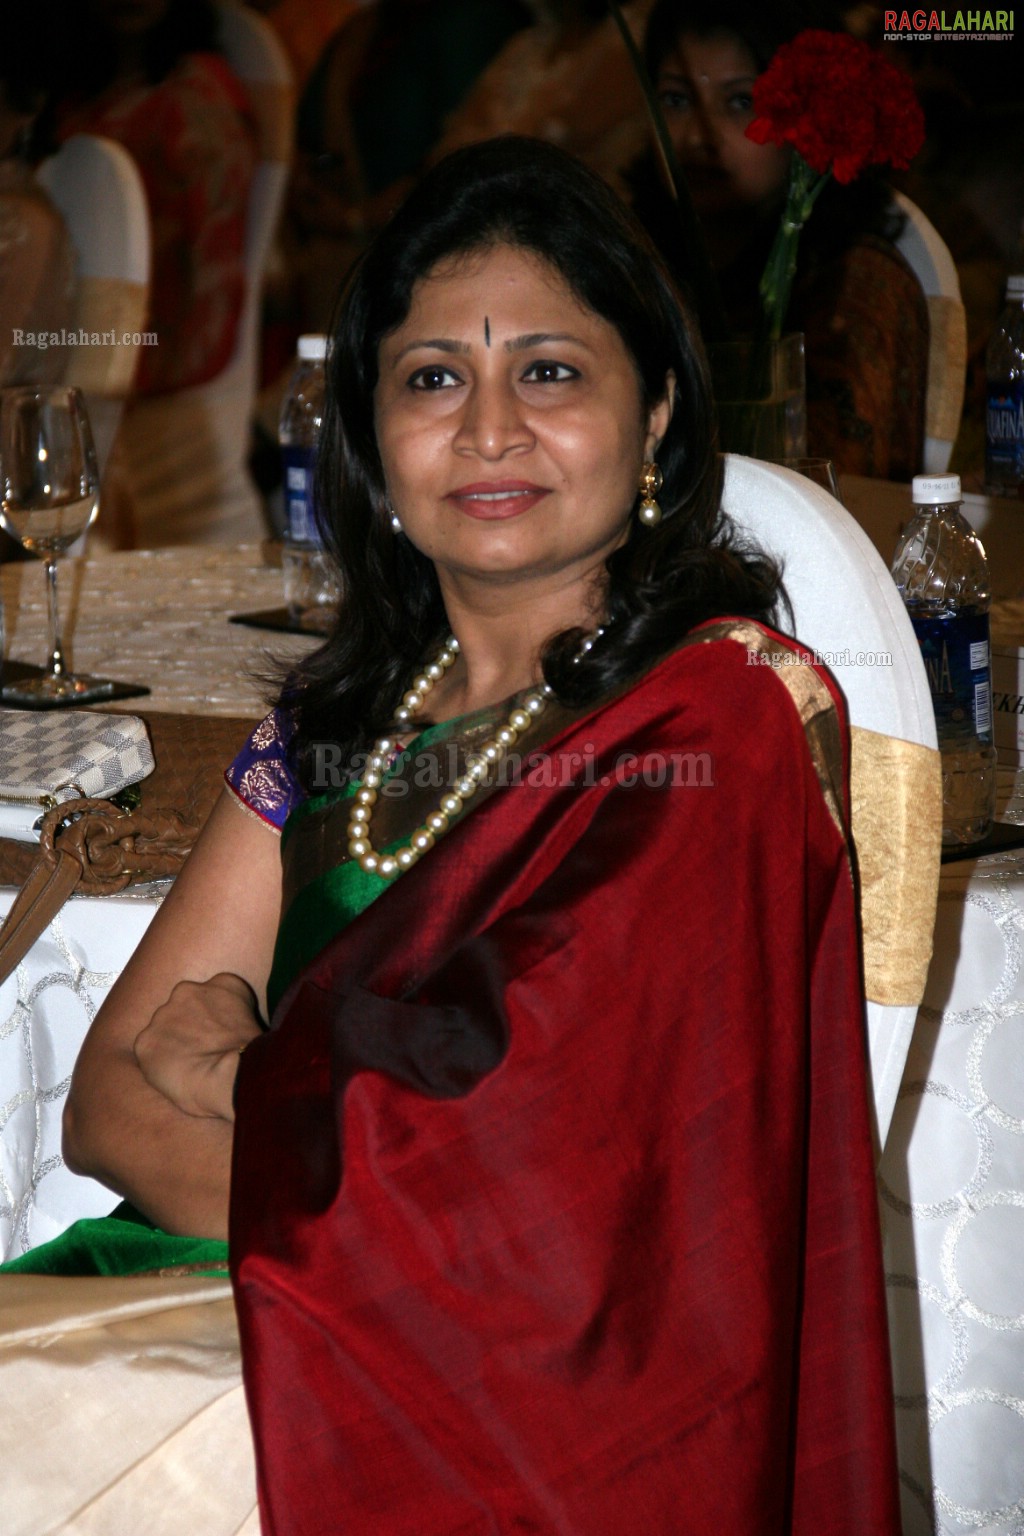 FICCI Ladies Organisation announces Ms.Aparna Reddy as its new Chairperson